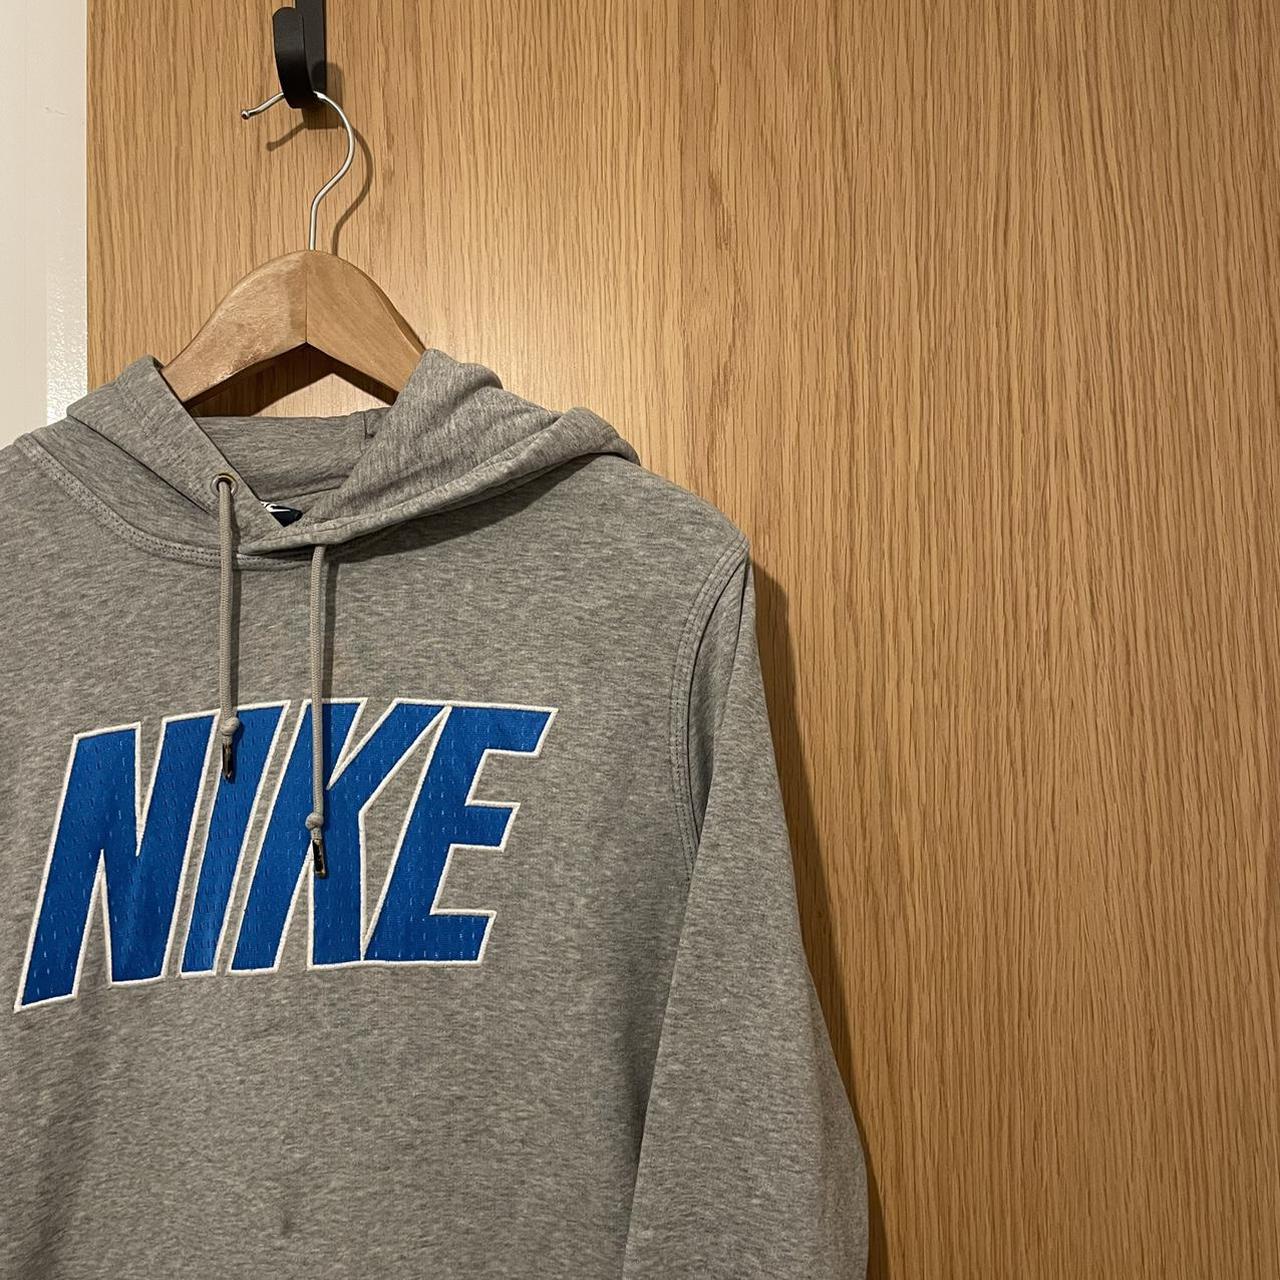 Product Image 2 - Nike Jumper!!

- in good condition
-size